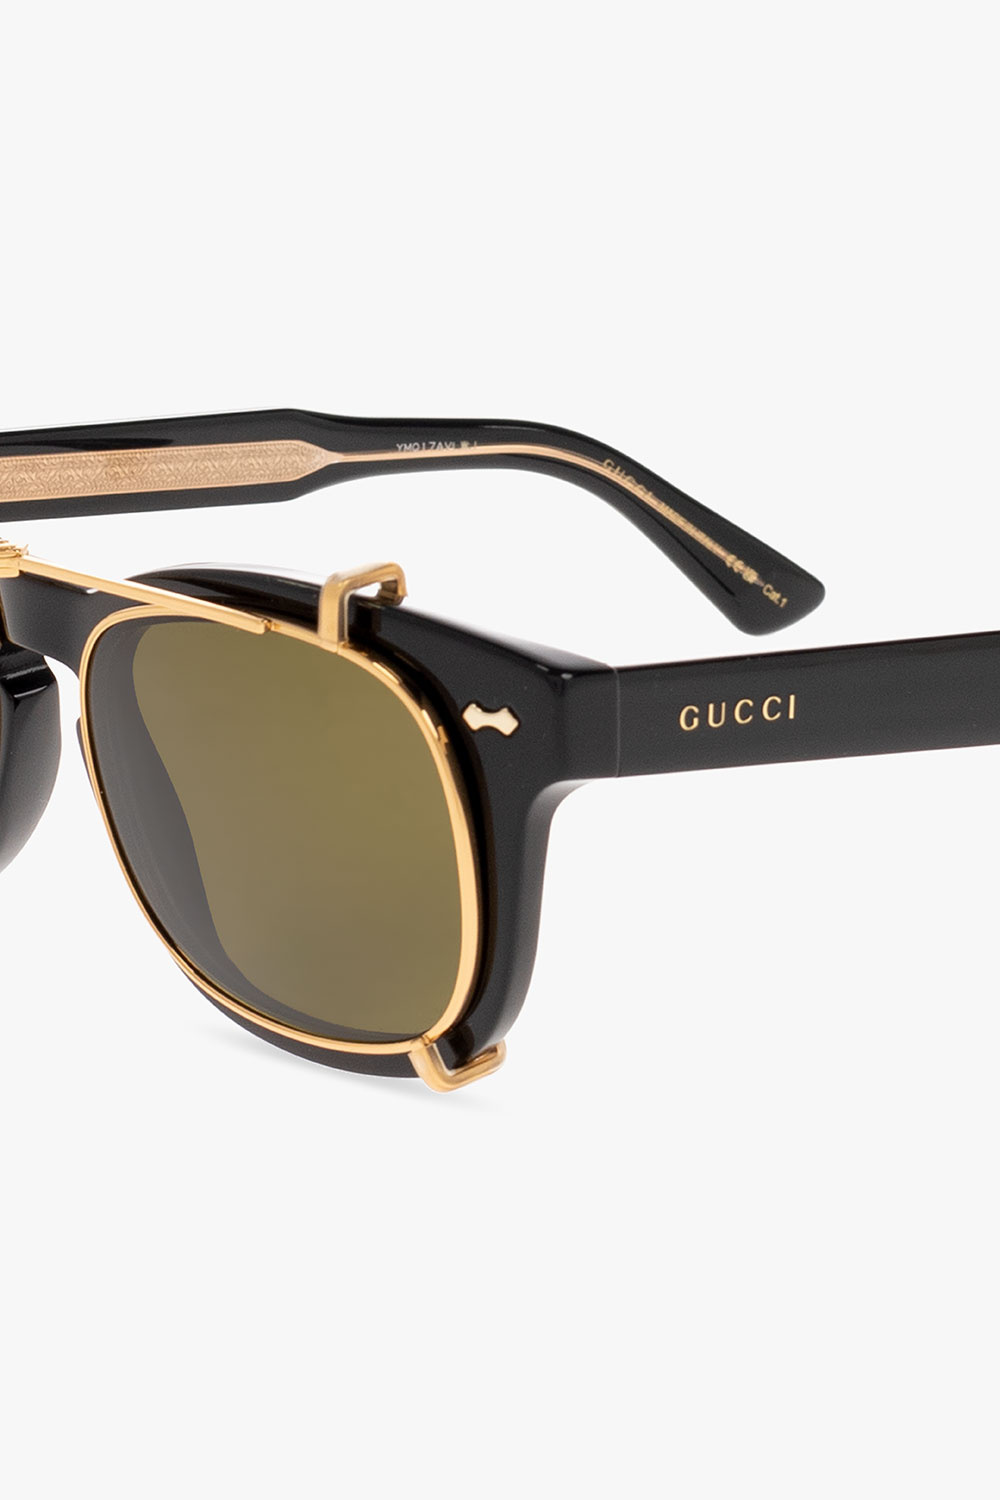 Gucci givenchy eyewear misappropriate frame sunglasses celine item